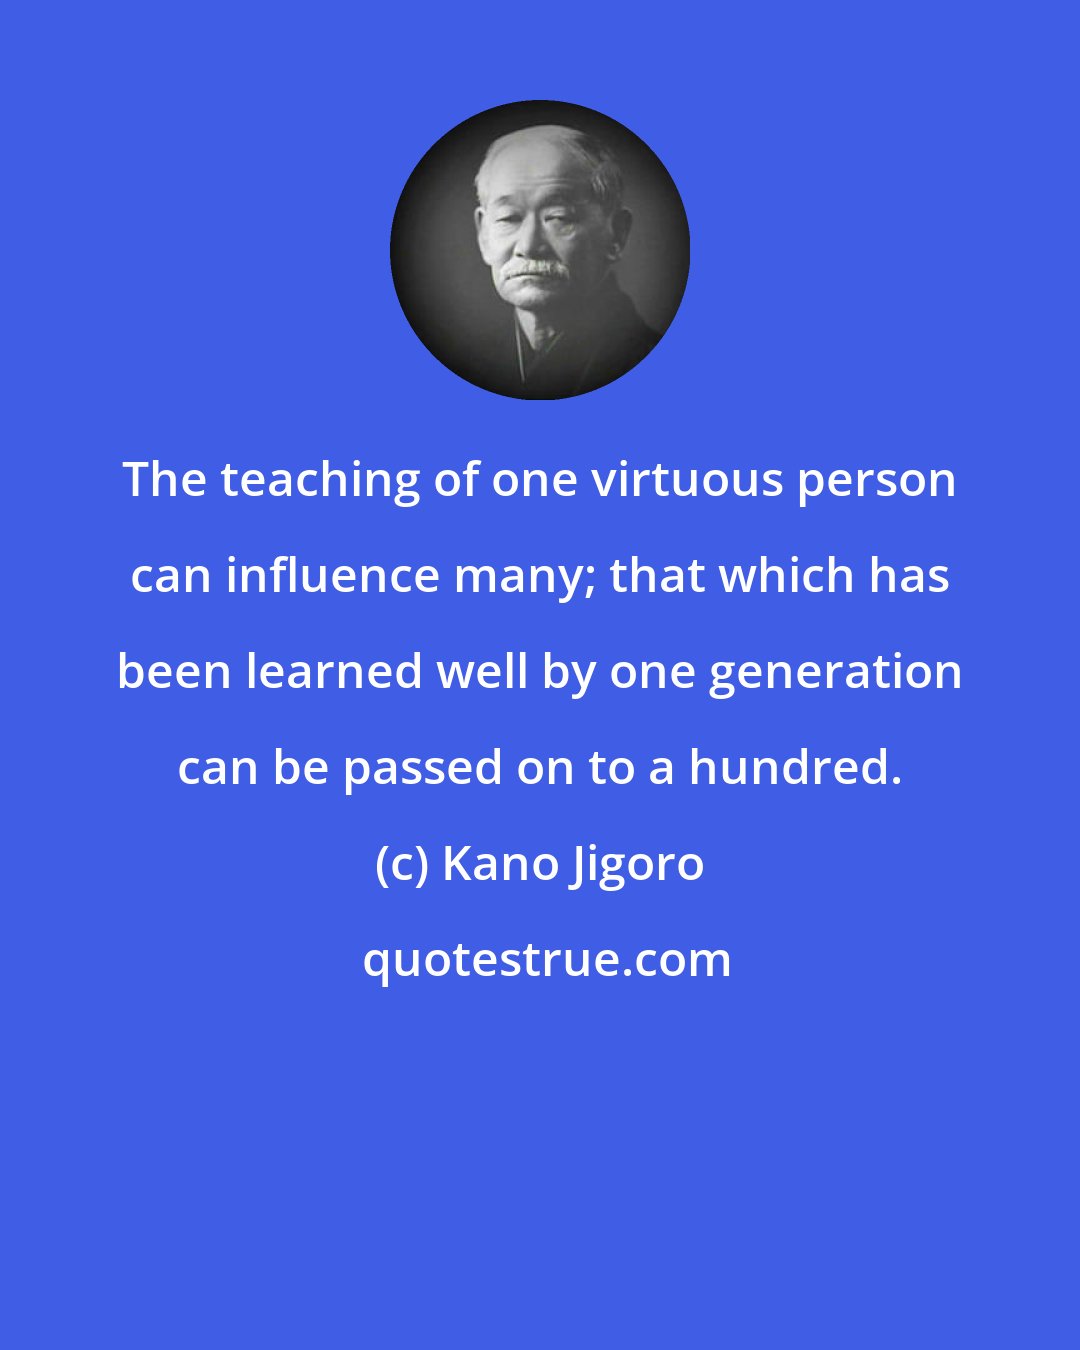 Kano Jigoro: The teaching of one virtuous person can influence many; that which has been learned well by one generation can be passed on to a hundred.